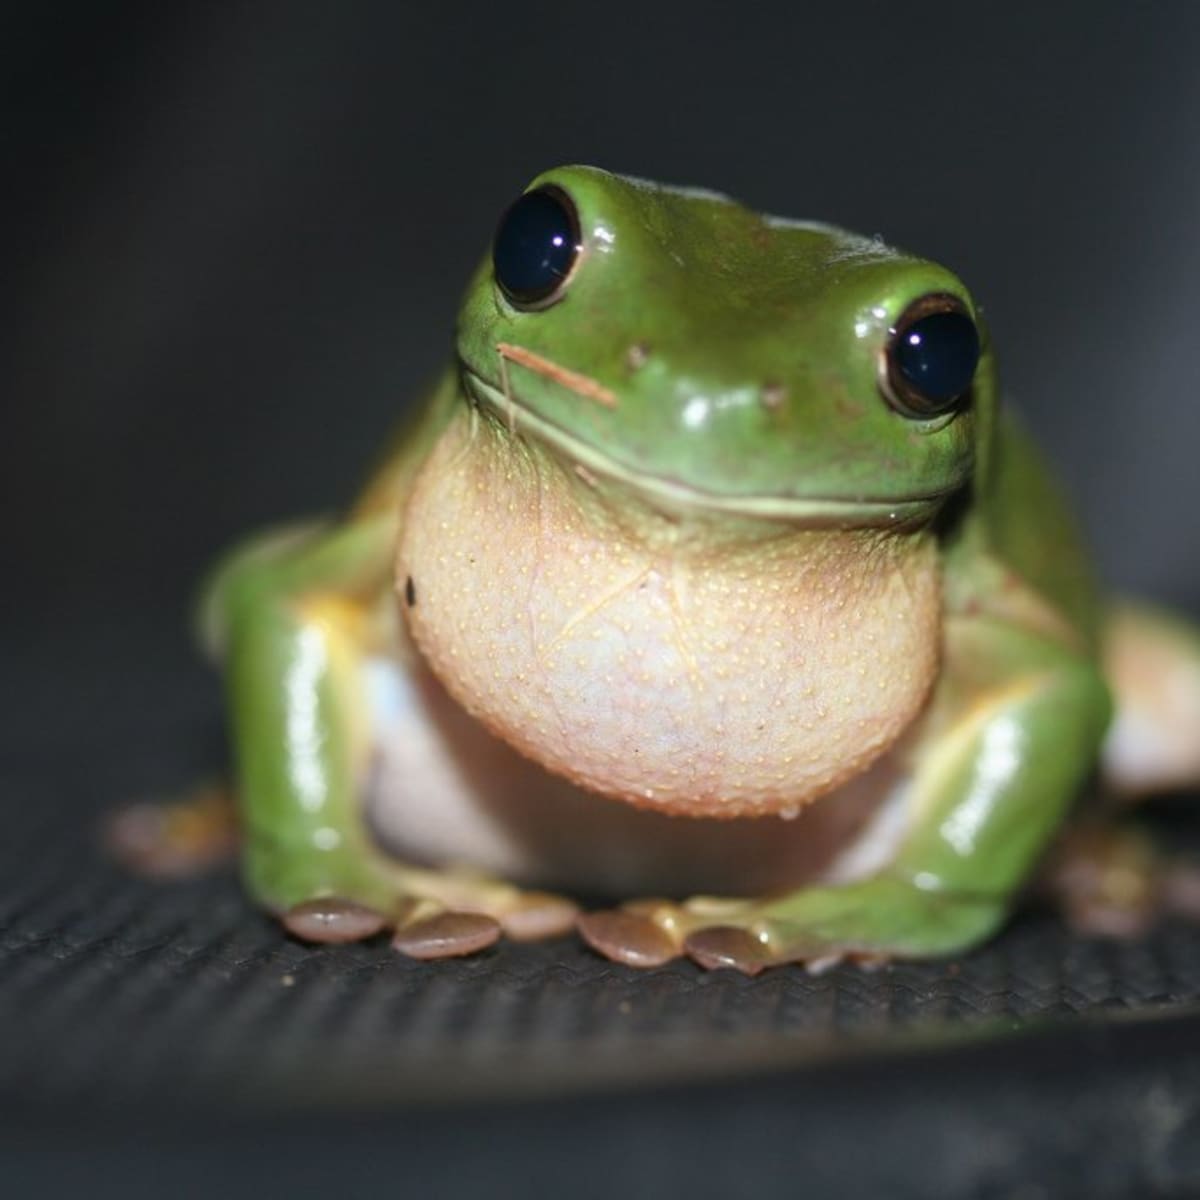 Facts About Green Frogs: Things to Before Keeping Them as Pets - PetHelpful